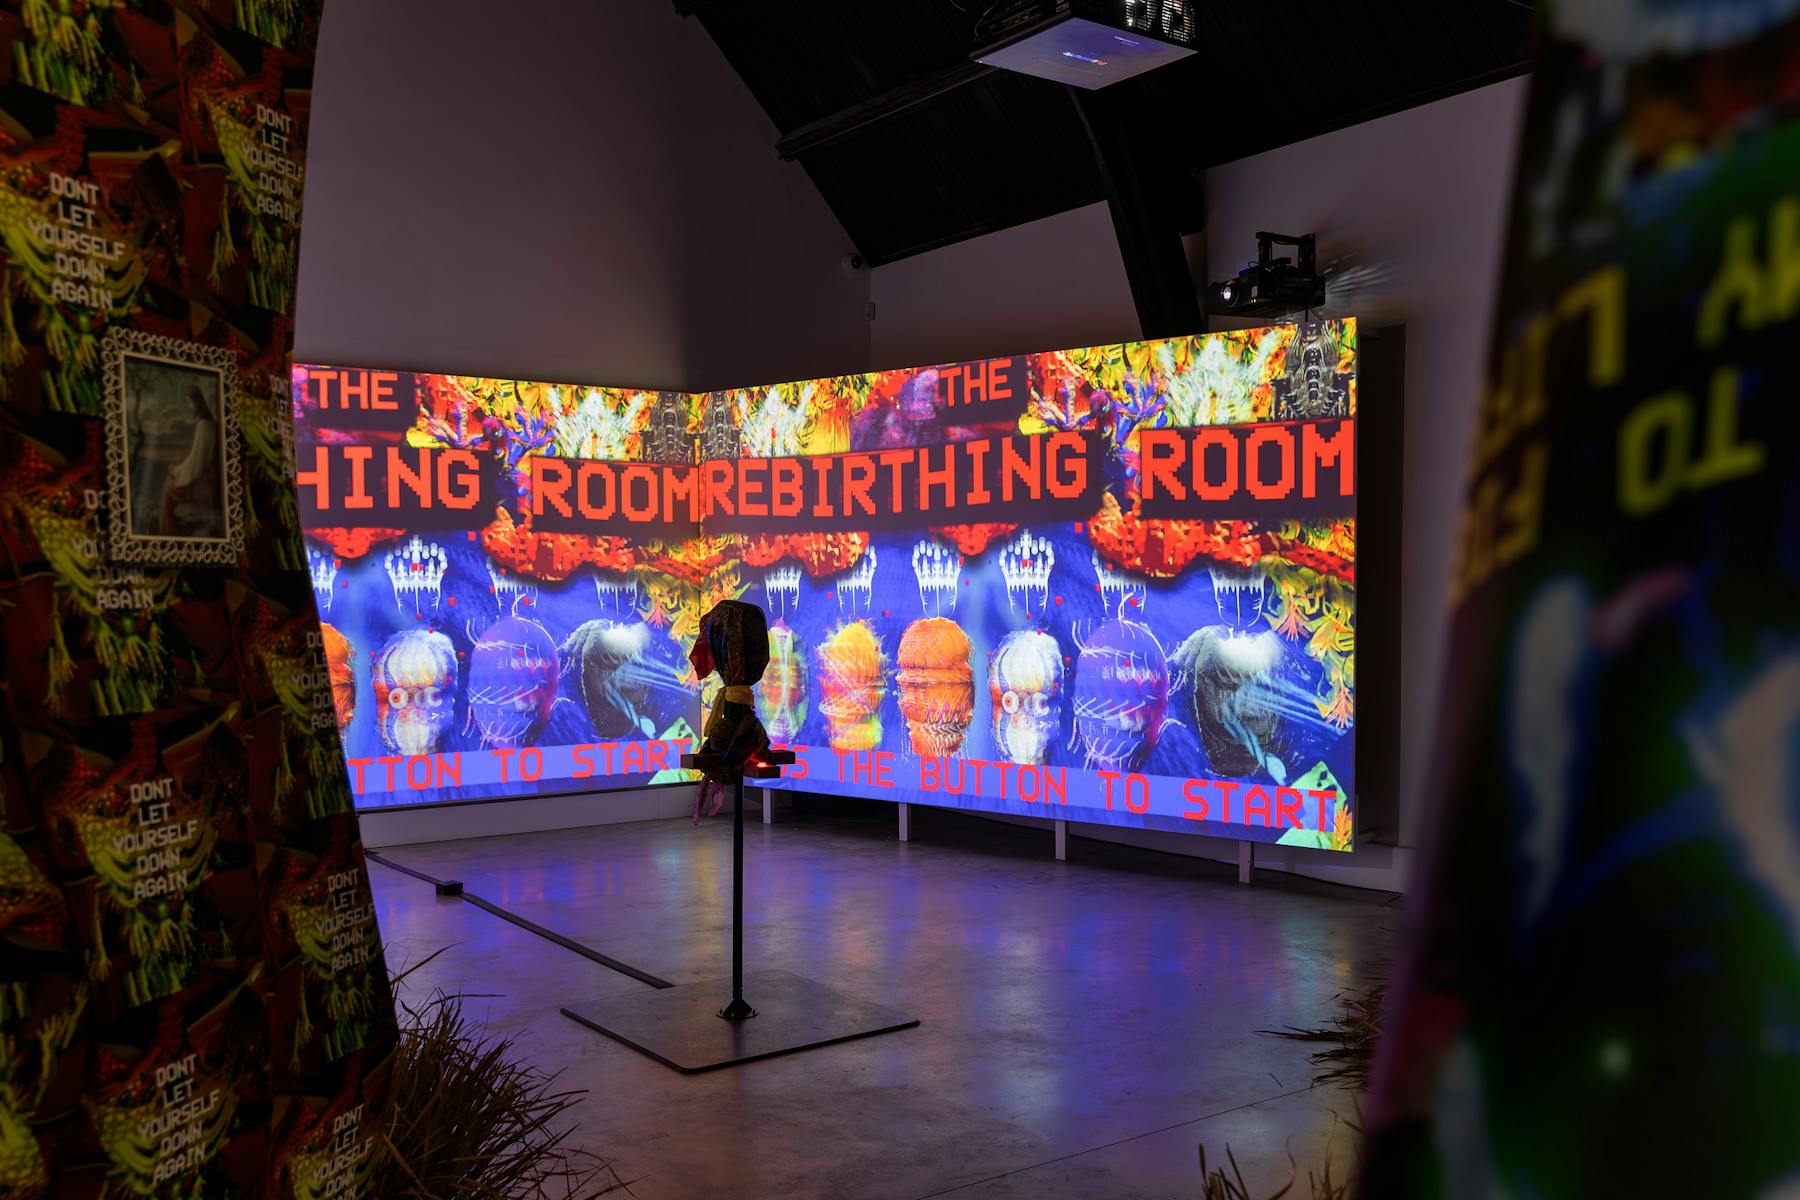 a photograph of two large wall sized screen with projections that read 'THE REBIRTHING ROOM'. In the foreground there is a hooded object on a stand.  